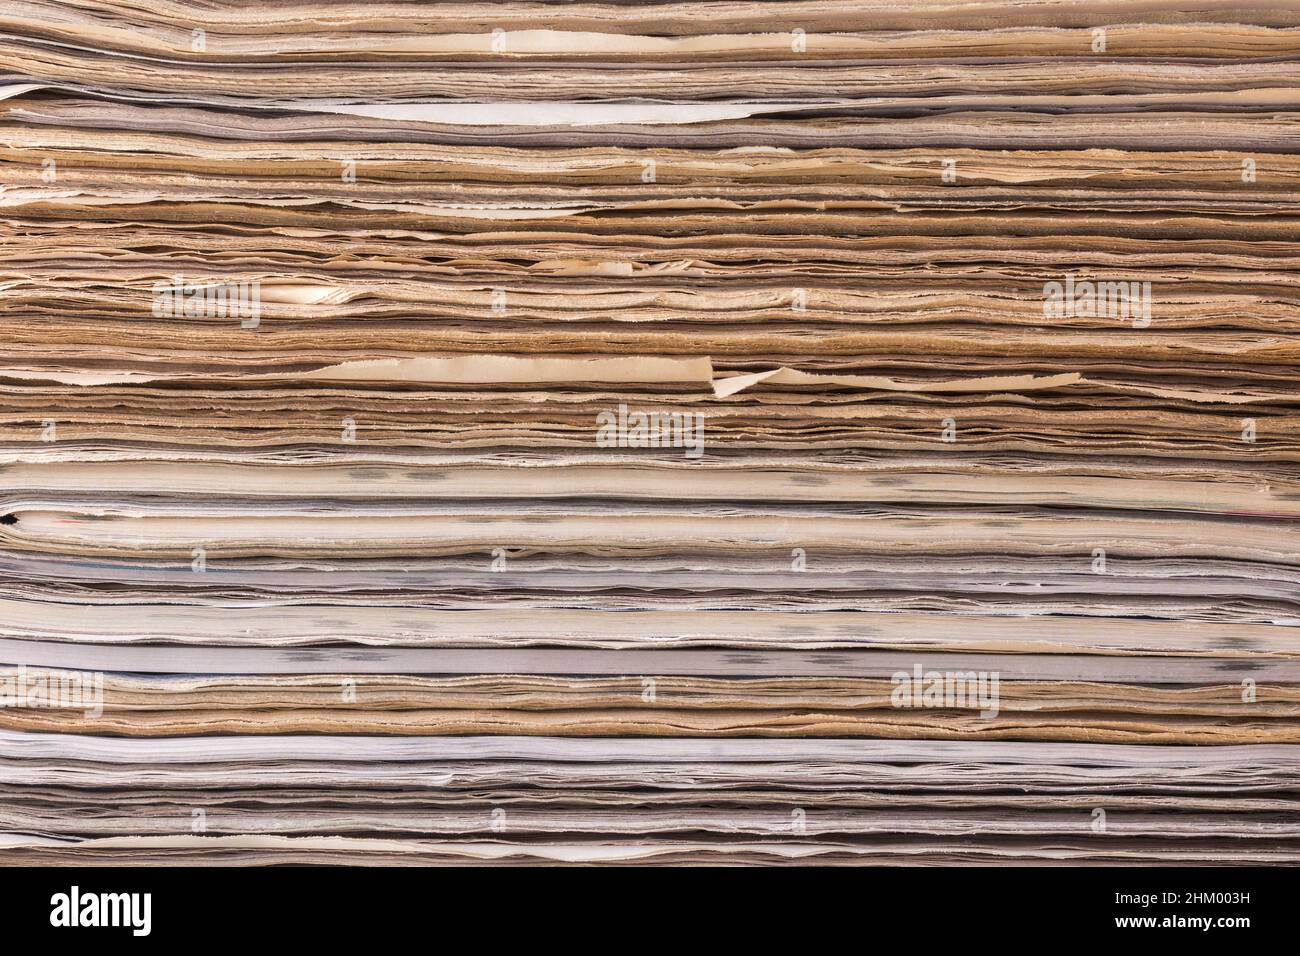 abstract of bundle of papers, stacked newspaper background texture, closeup view, waste paper recycling concept Stock Photo